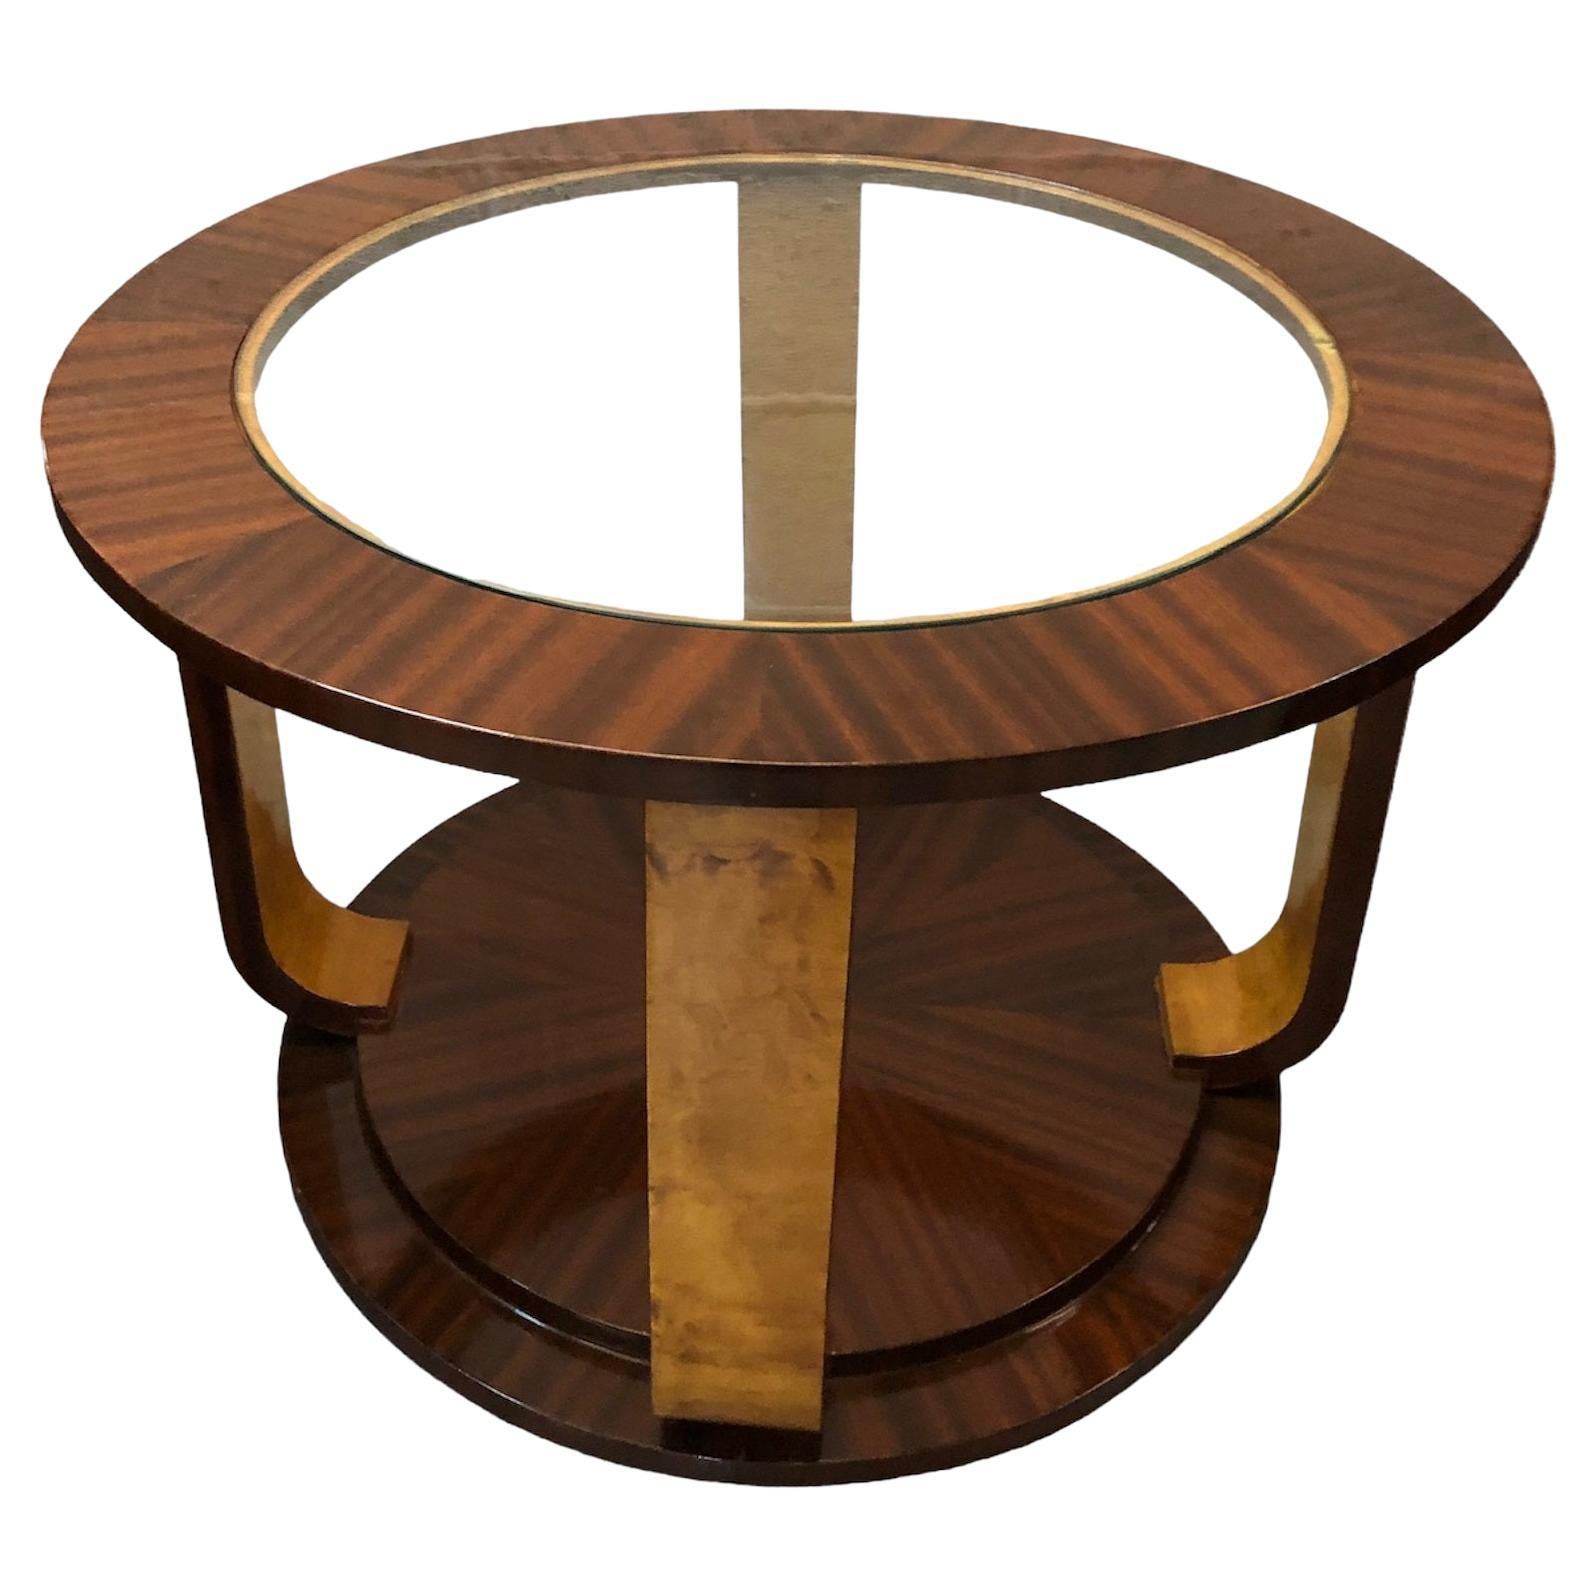 Amaizing Art Deco, Table in Wood and Glass, France, 1930 For Sale